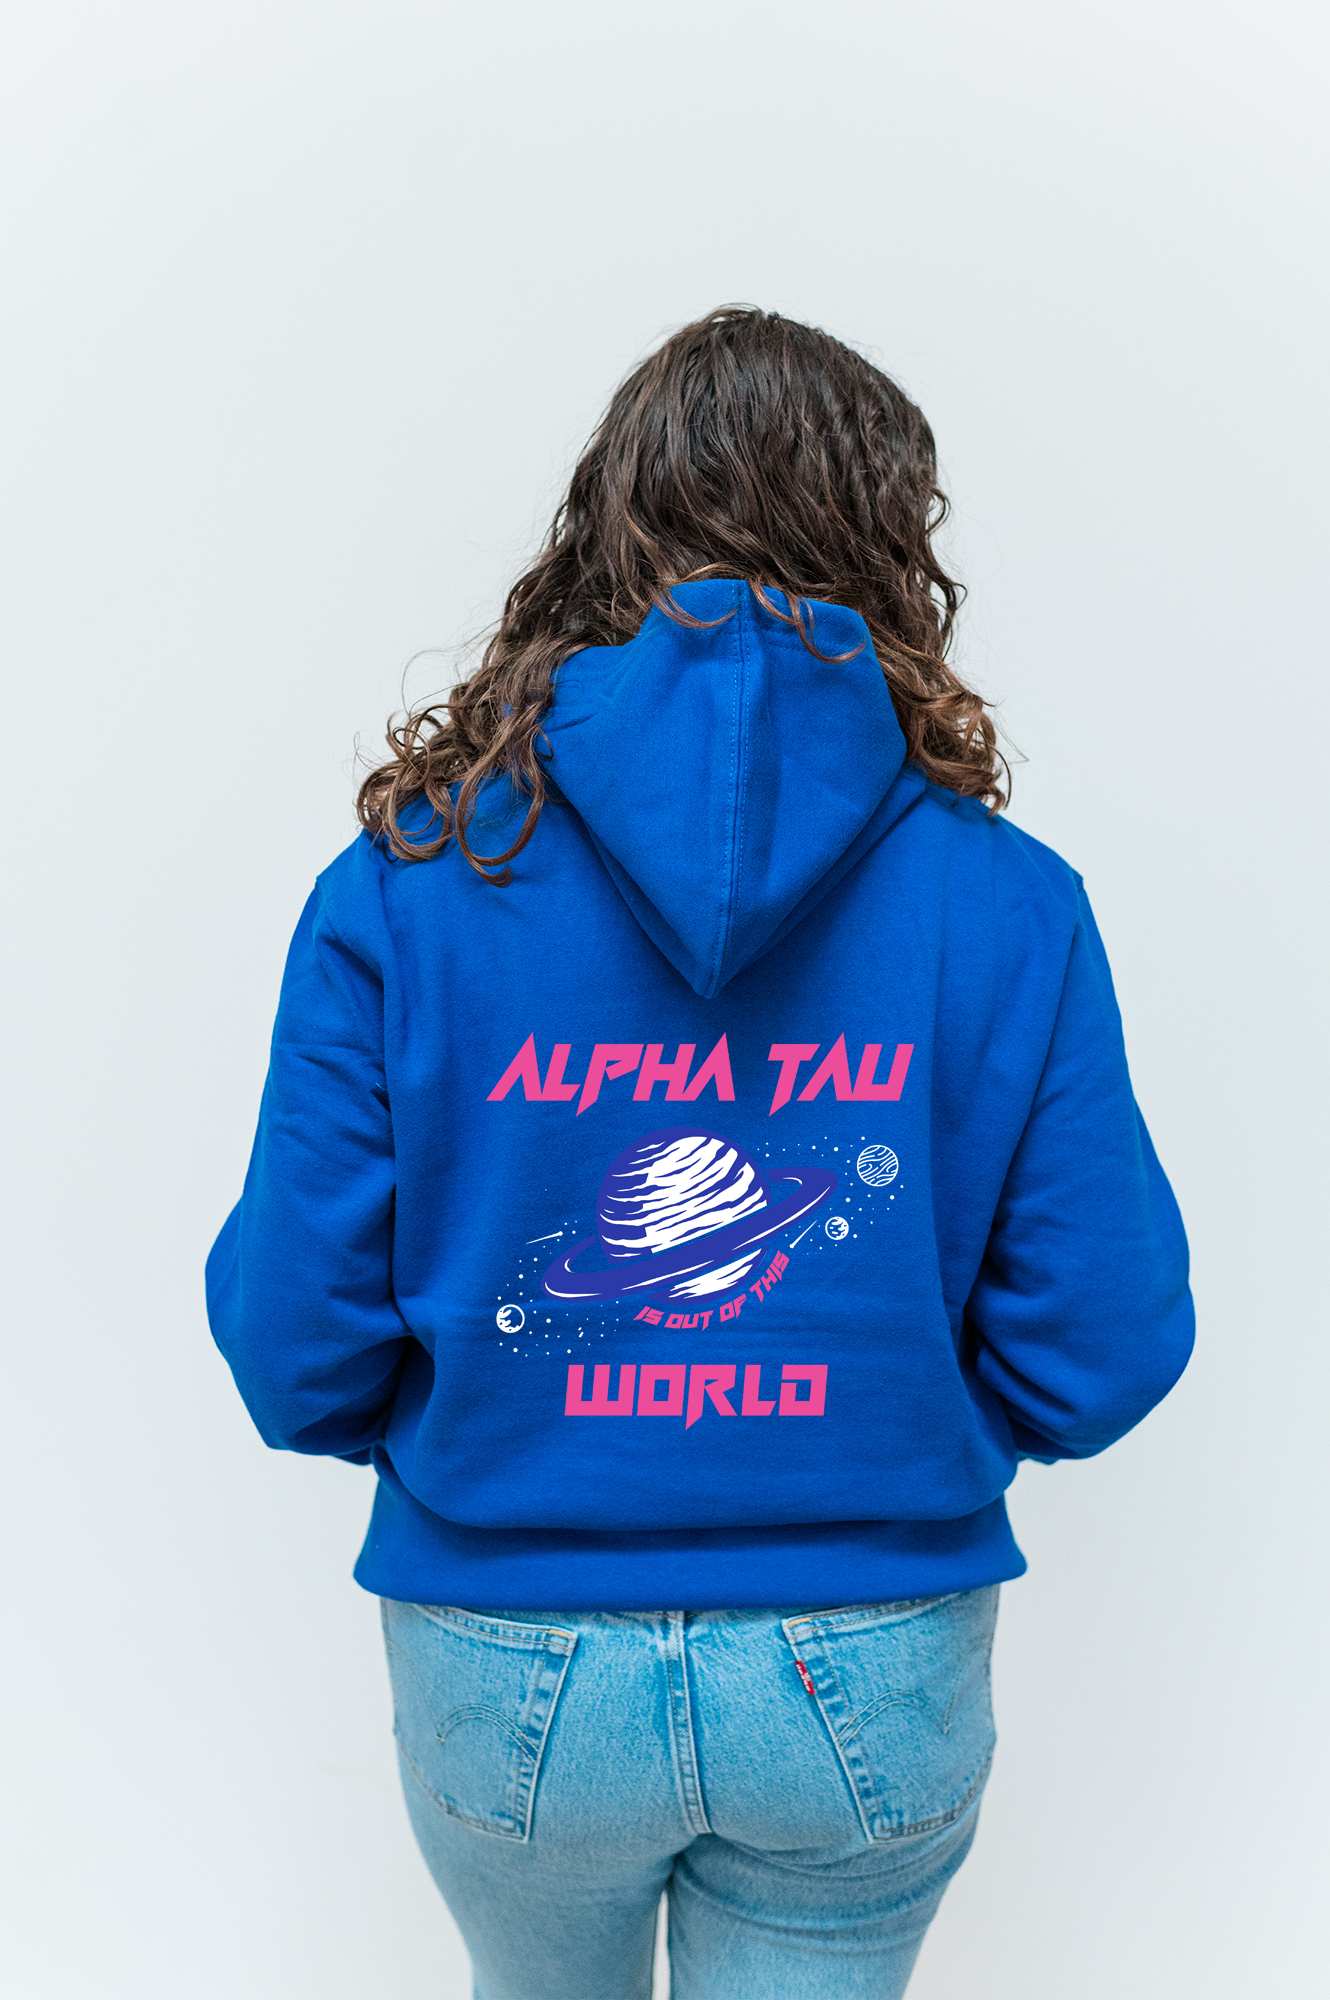 a woman wearing a blue hoodie with the words alpha tal world on it